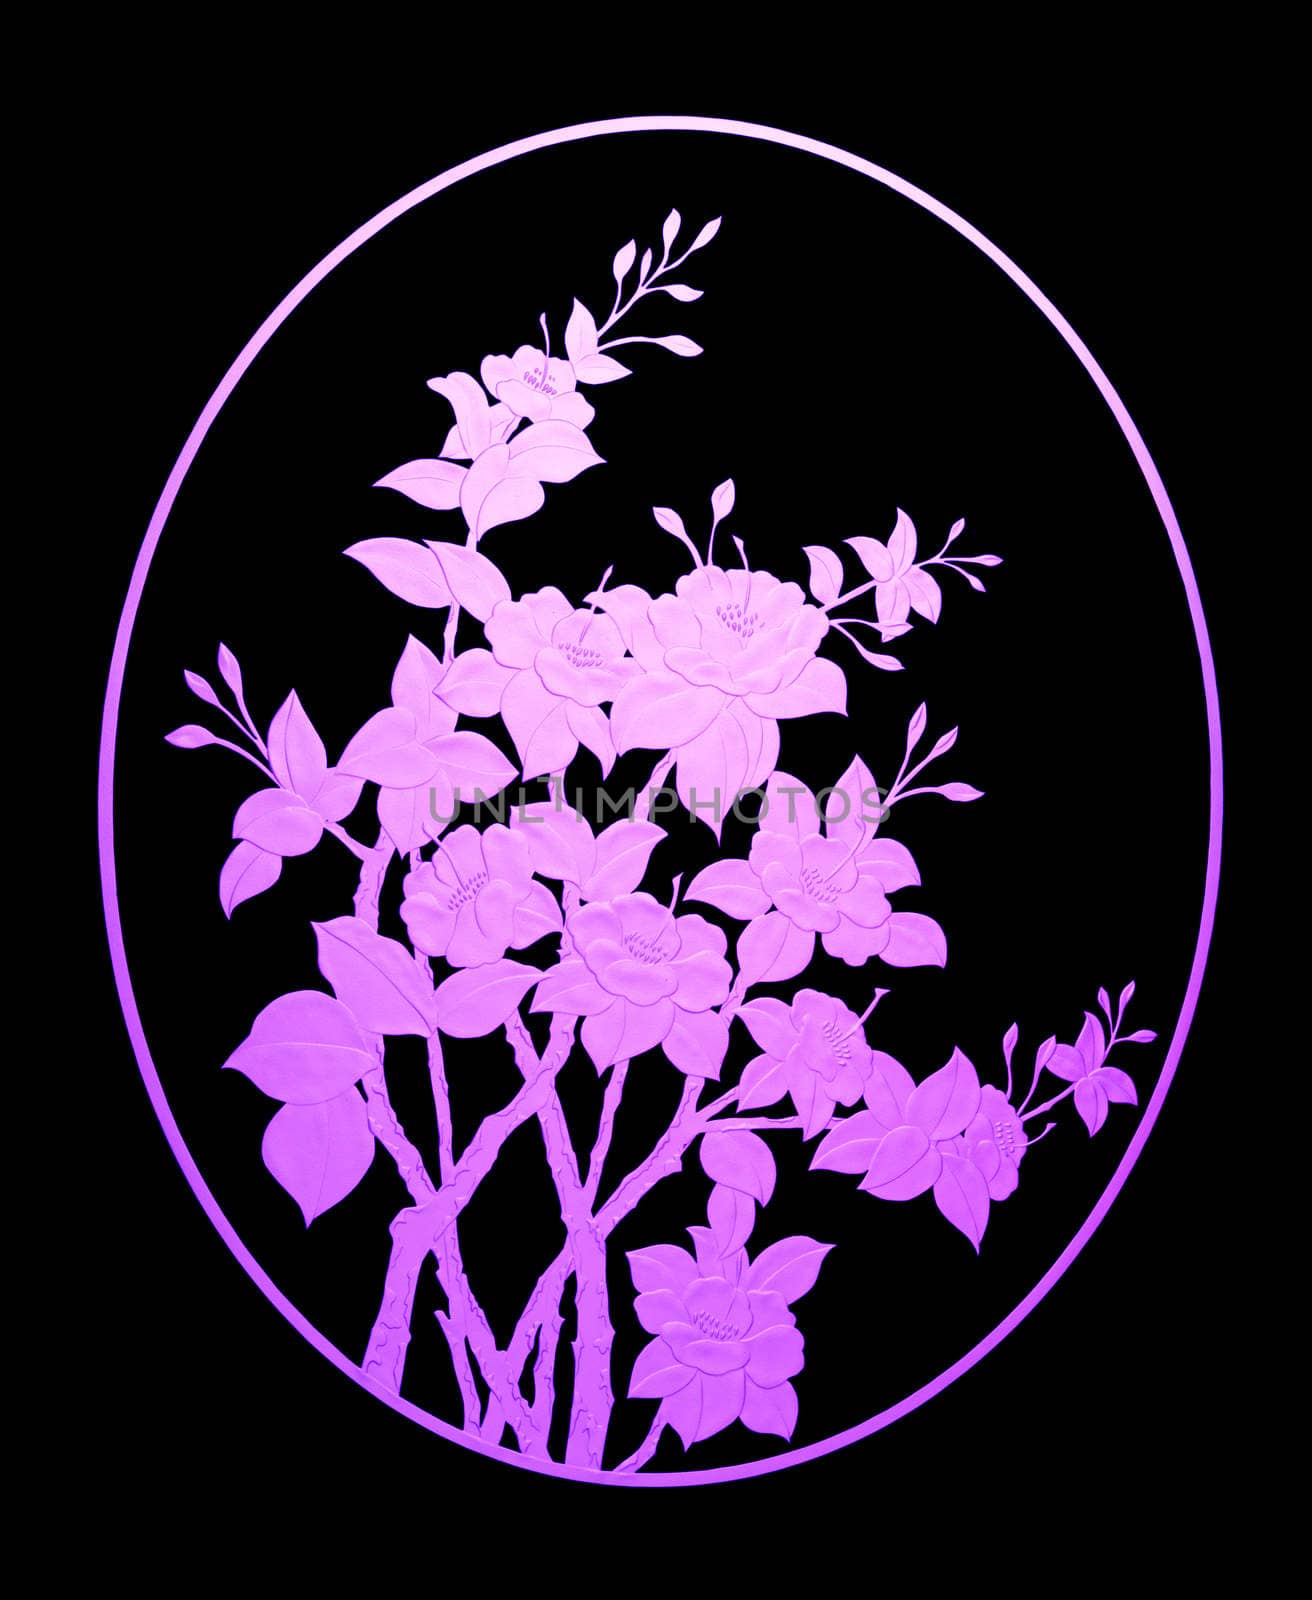 Pattern violet flower of glass on black background, clipping path